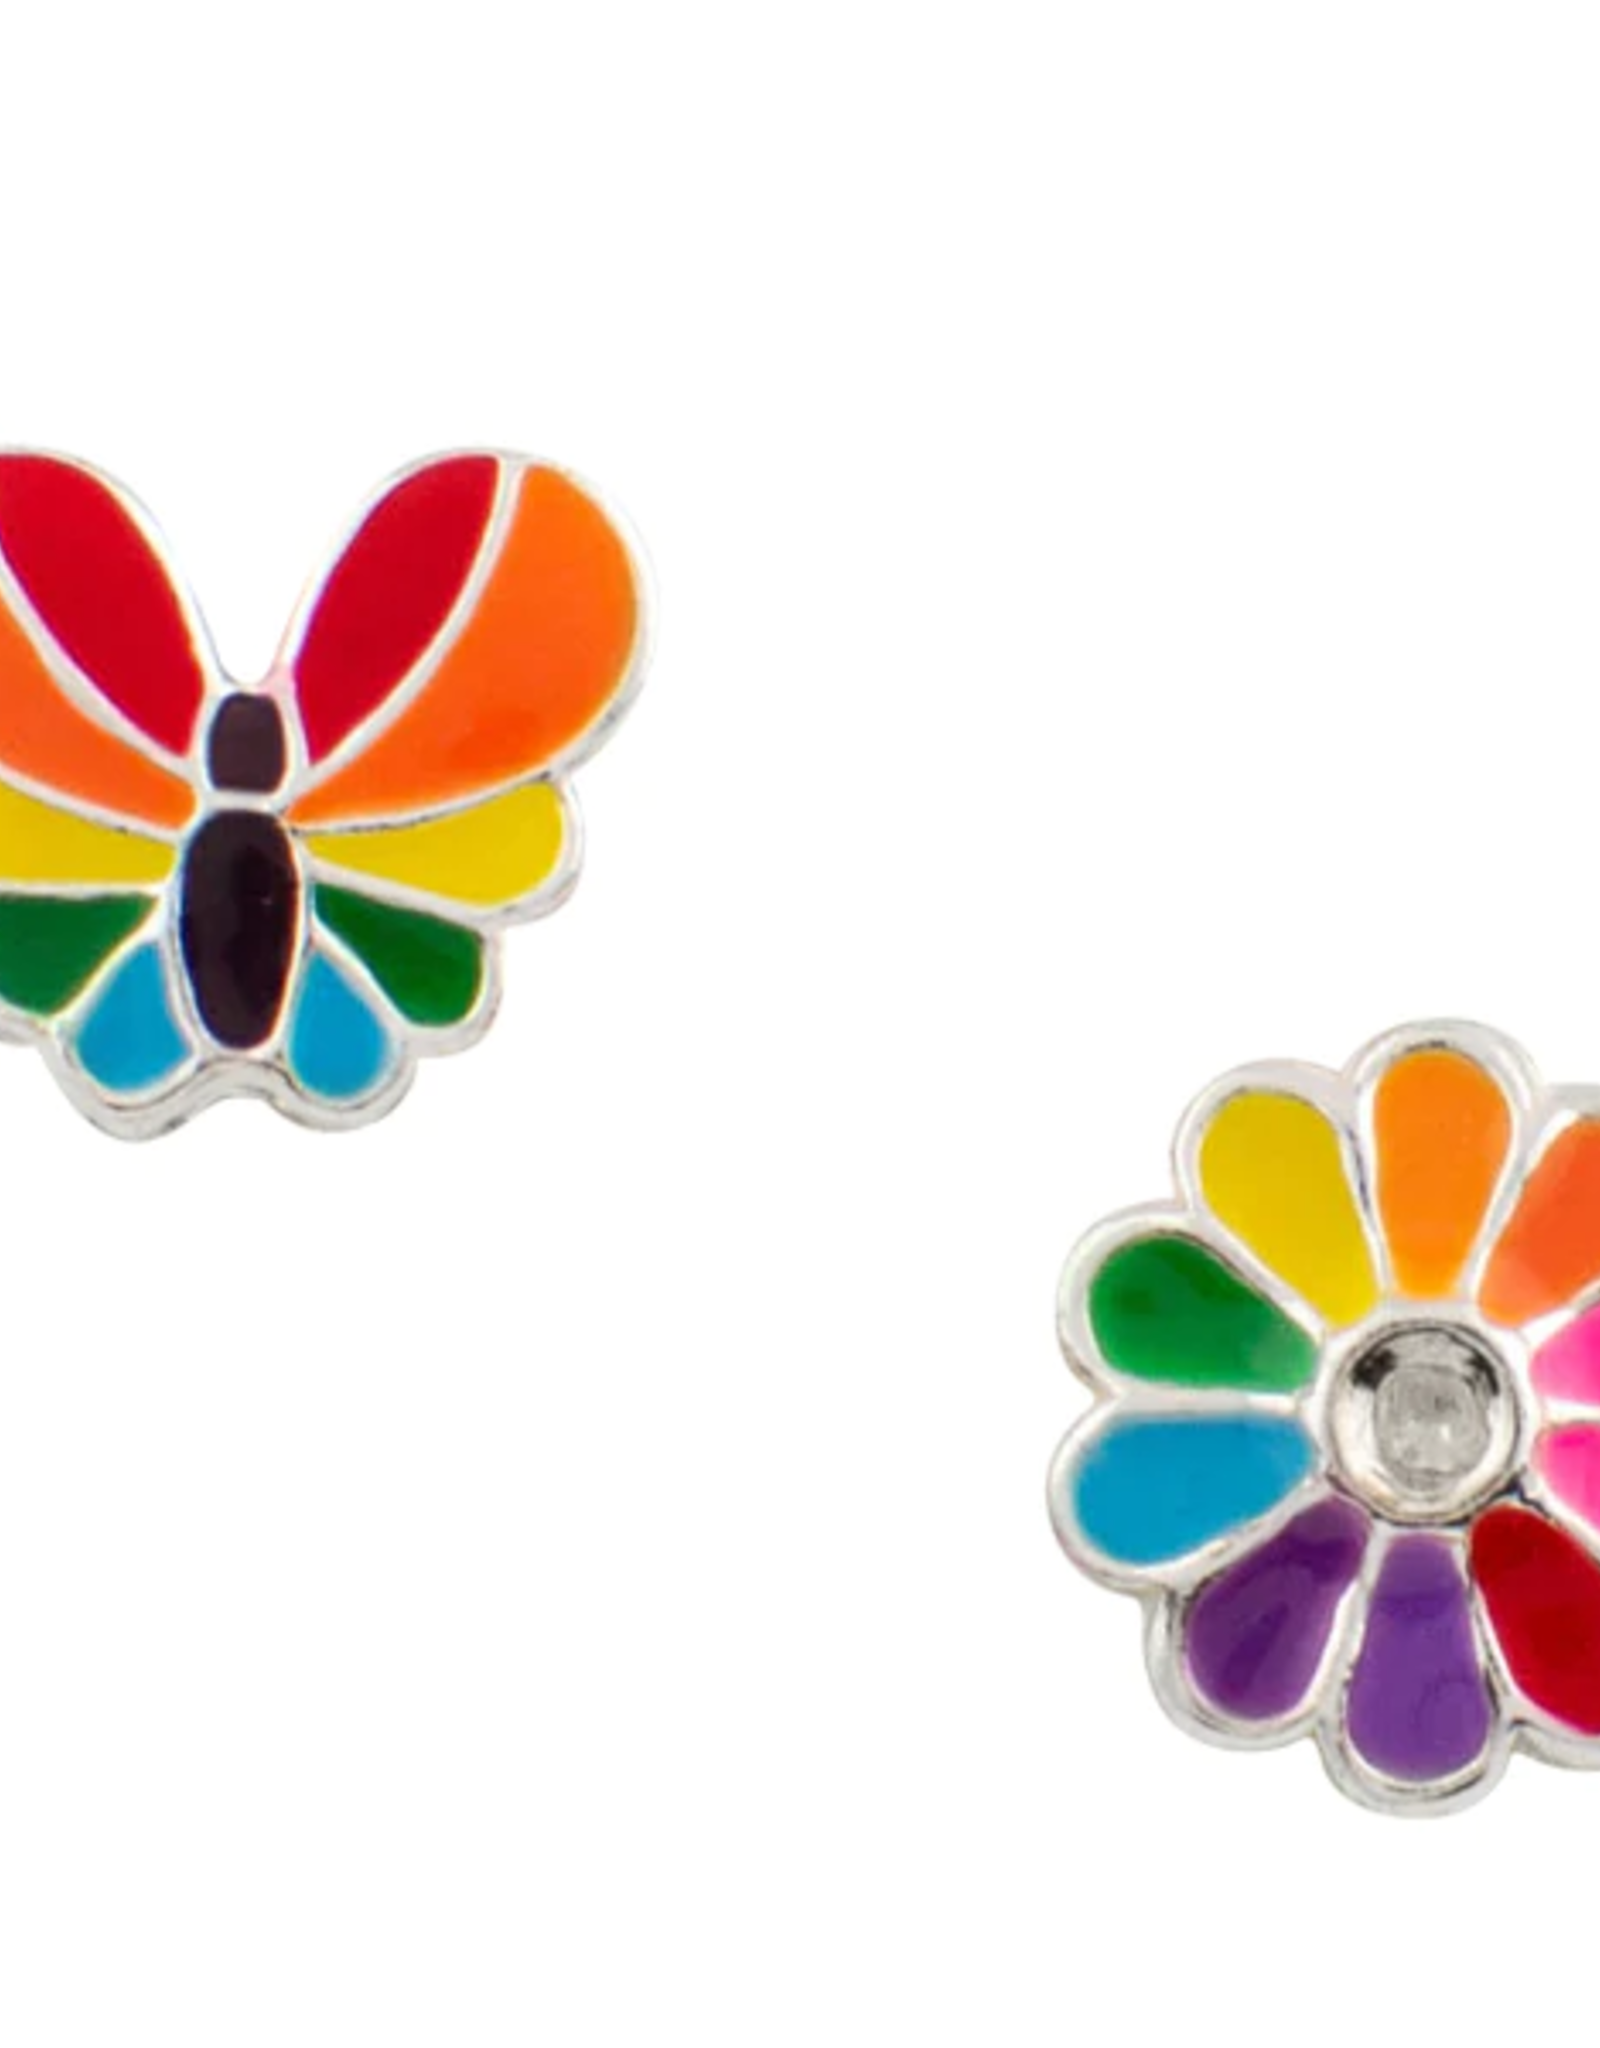 Good Collective RAINBOW BUTTERFLY AND FLOWER STUD EARRINGS - Tomas